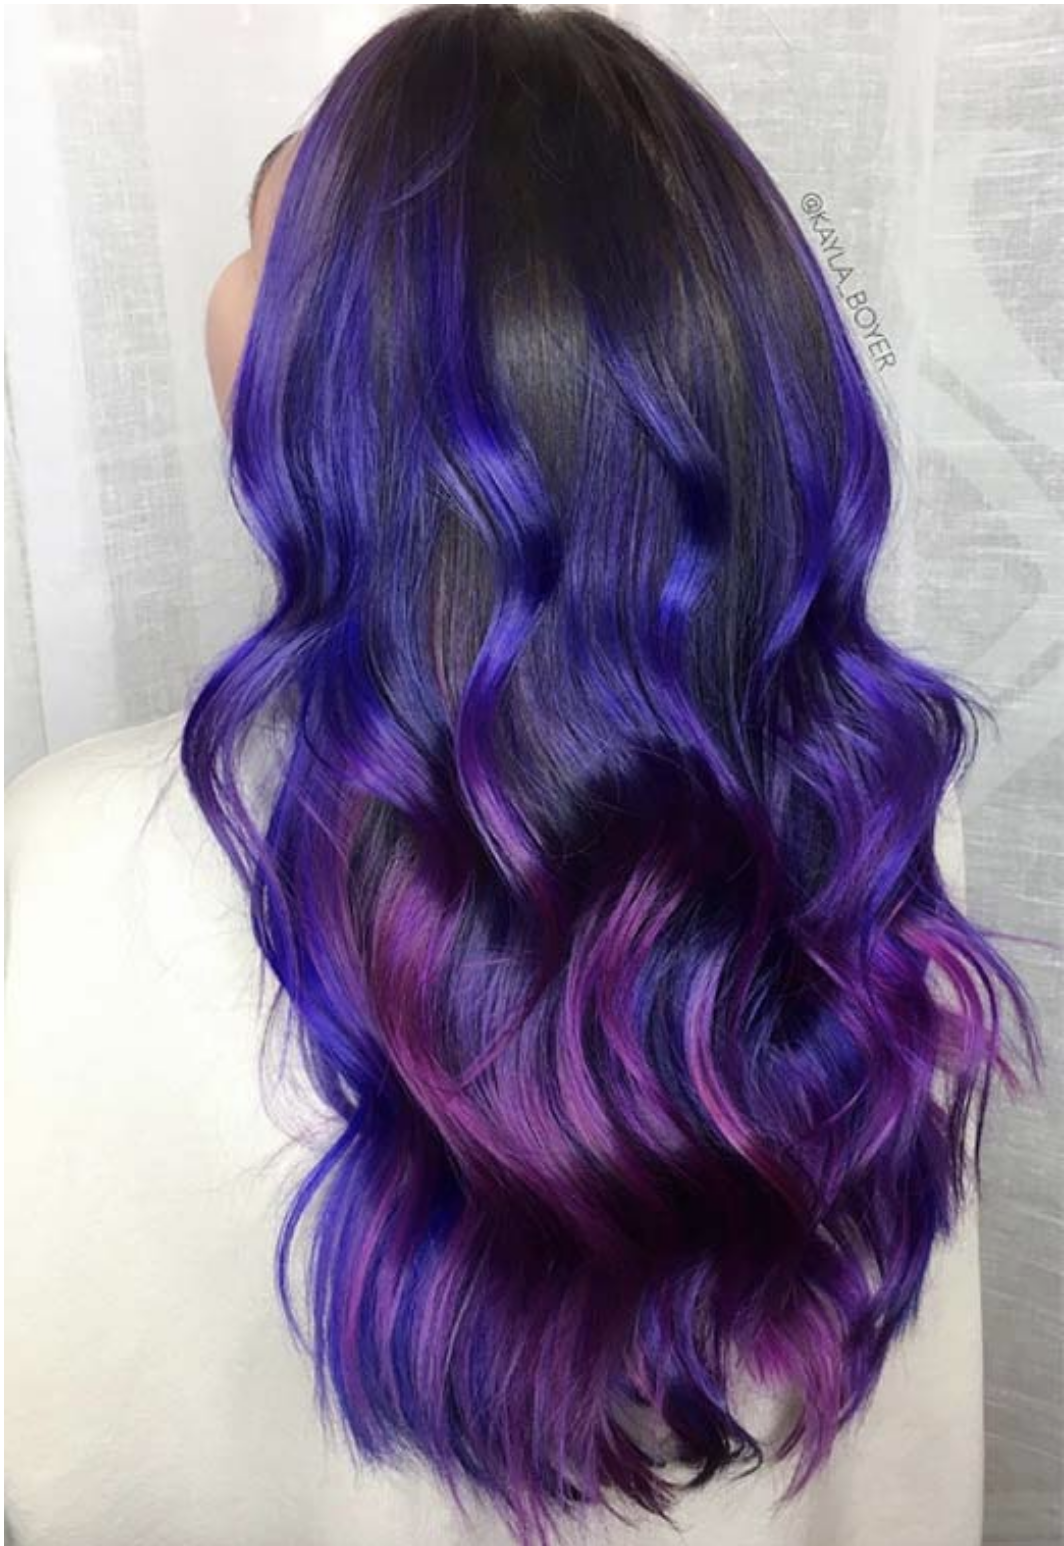 100+ Best Light Purple Hair Colors and Hairstyles 2021 - 2022 ...